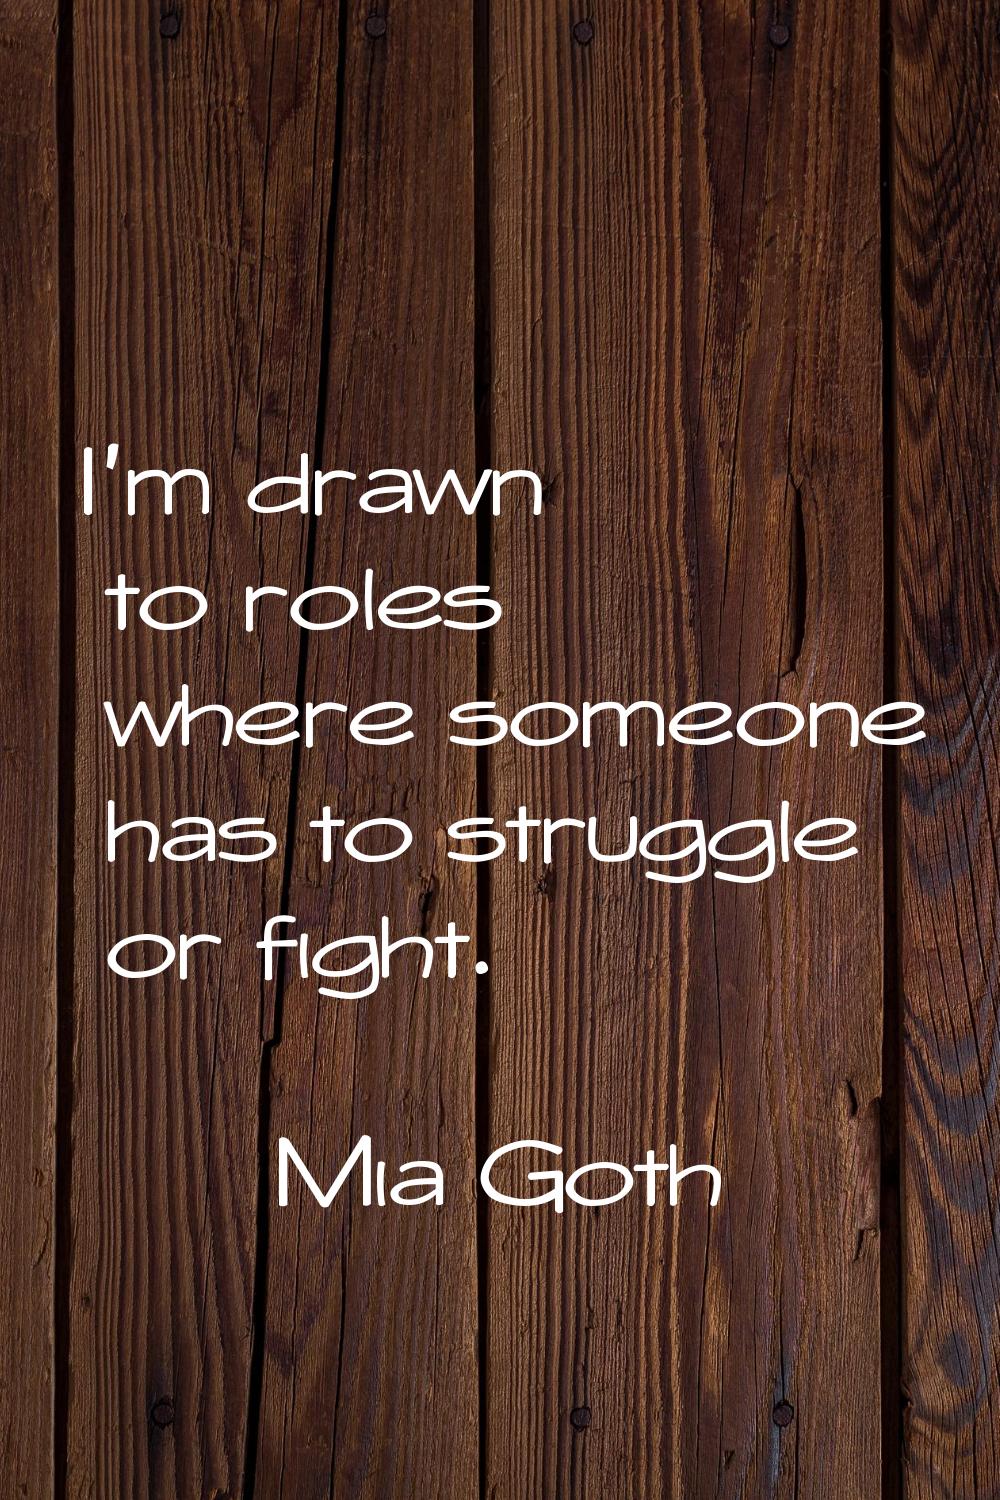 I'm drawn to roles where someone has to struggle or fight.